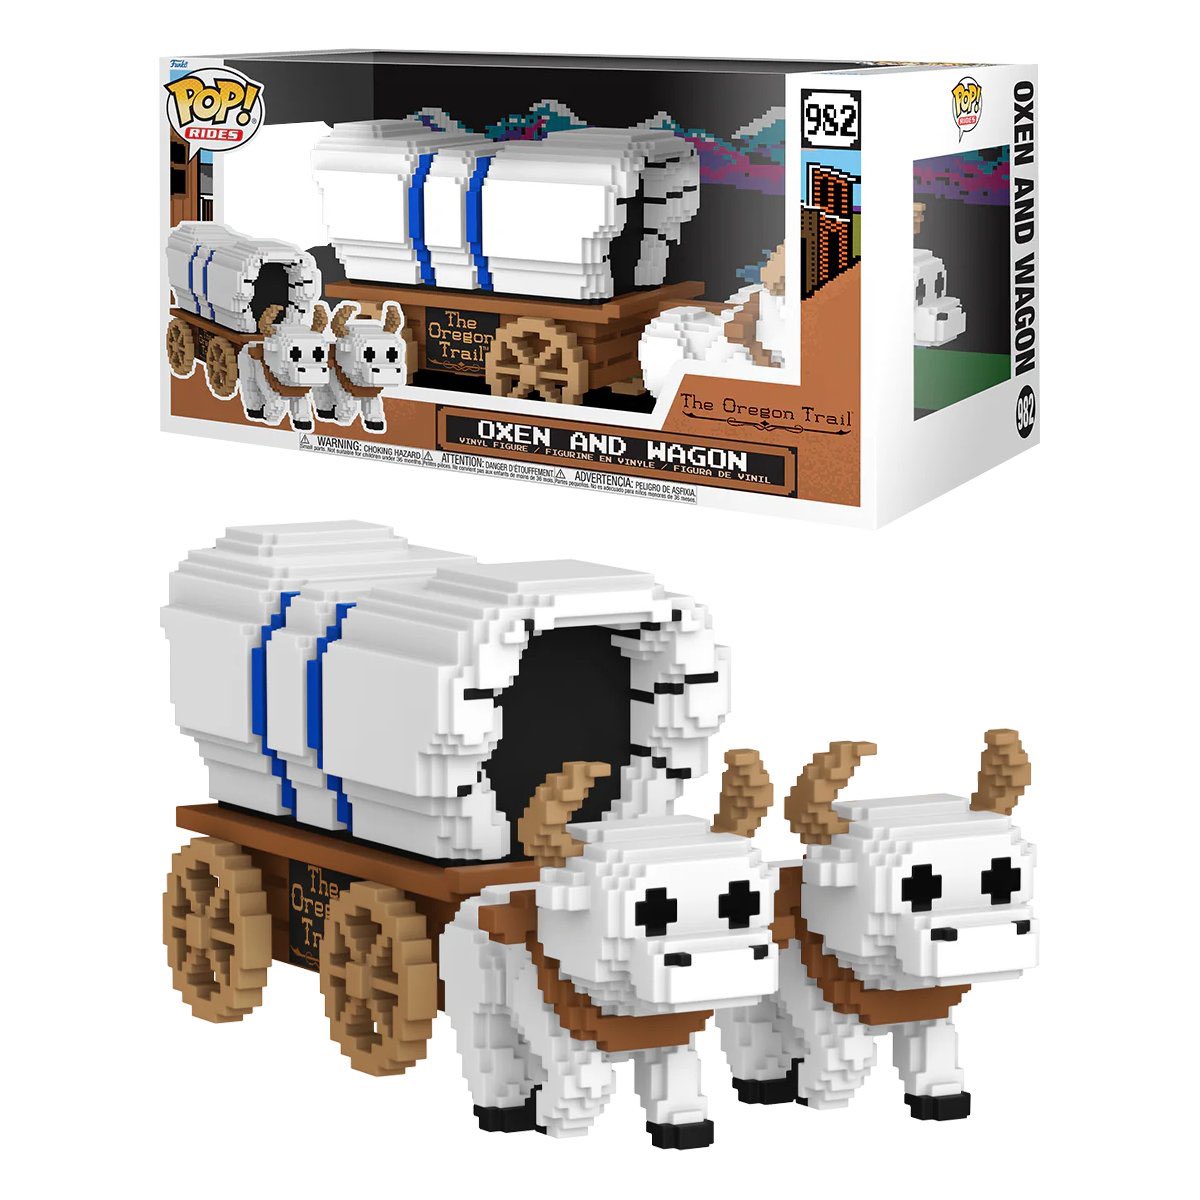 Preorder Now: Funko Pop! Rides Super Deluxe: The Oregon Trail - Oxen and Wagon 📦 Amazon: amzn.to/4dG9iLt 🌍 Ent Earth: ee.toys/27LA23 * No Charge Until it Ships #Ad #Funko #FunkoPop #FunkoPops #FunkoPopVinyl #Pop #PopVinyl #FunkoCollector #Collectible